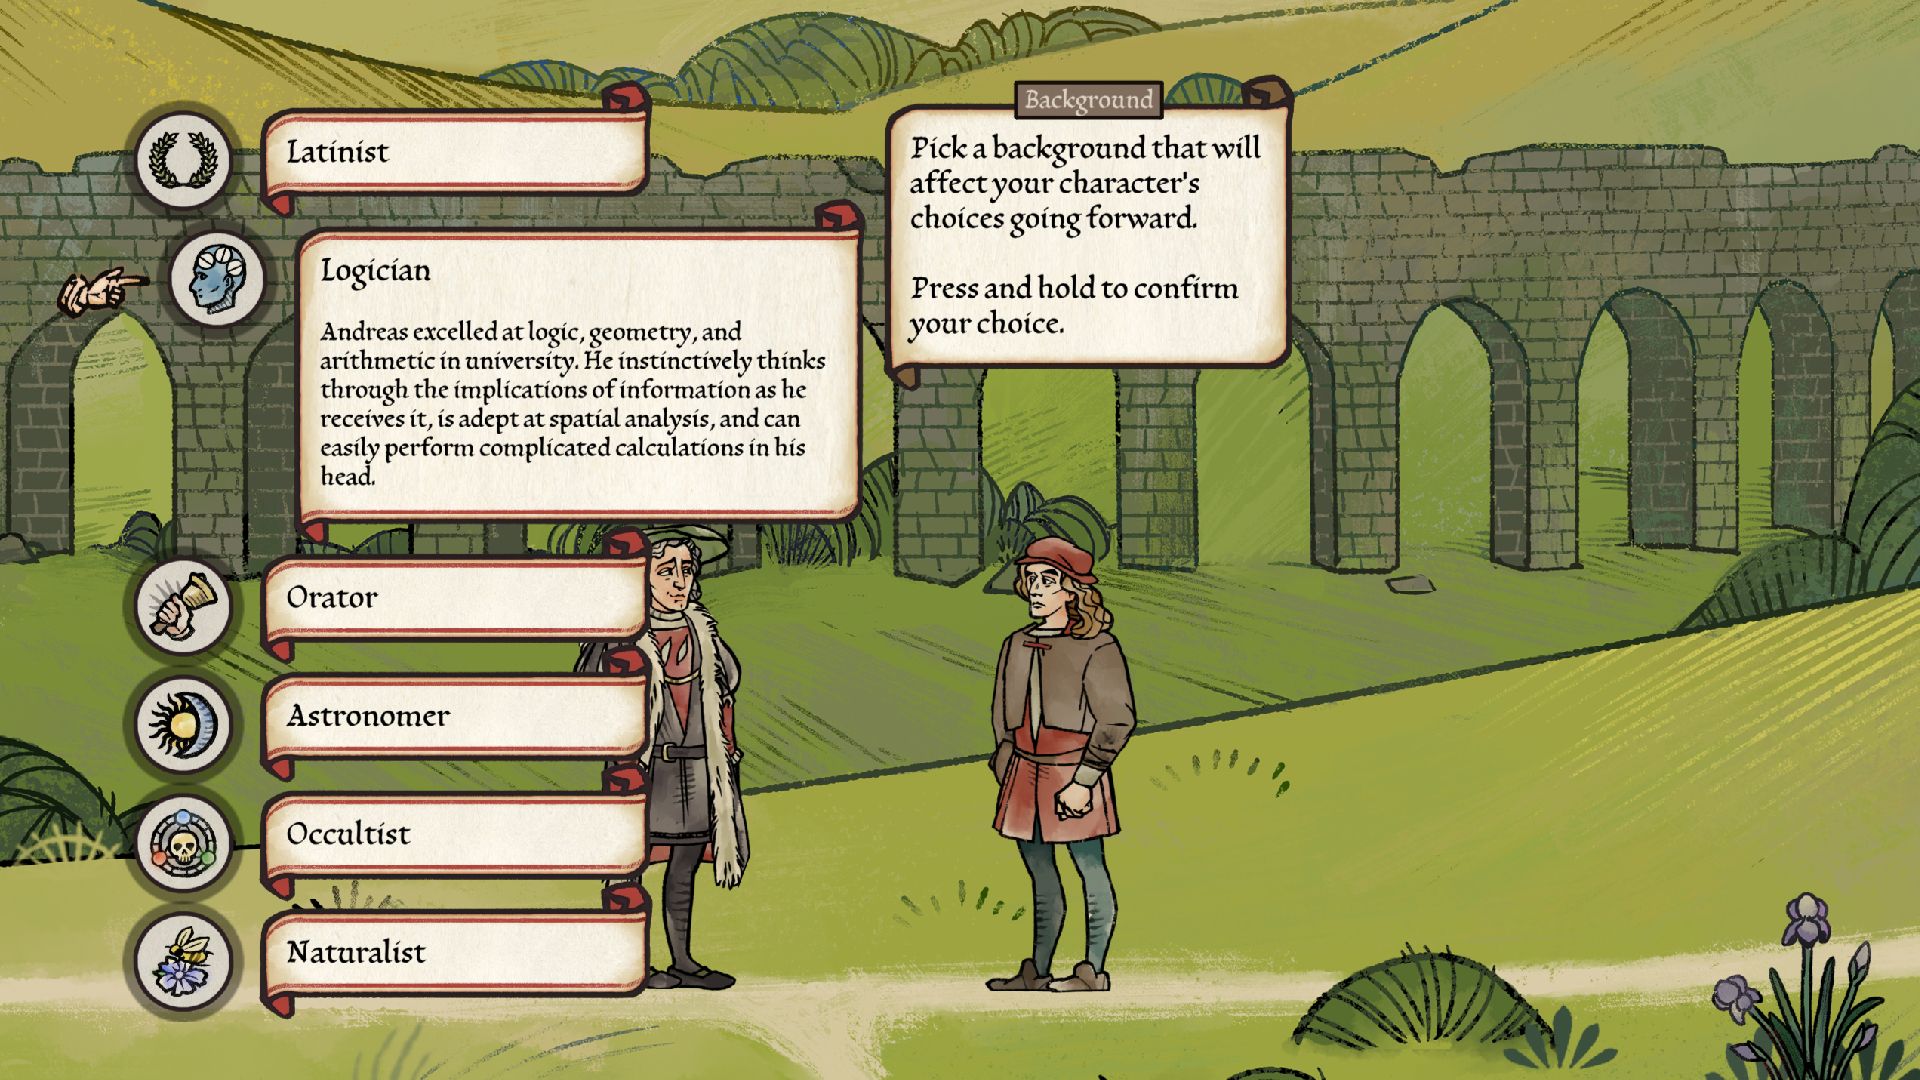 Player's choices for Andreas' favorite subjects will unlock dialogue options and abilities